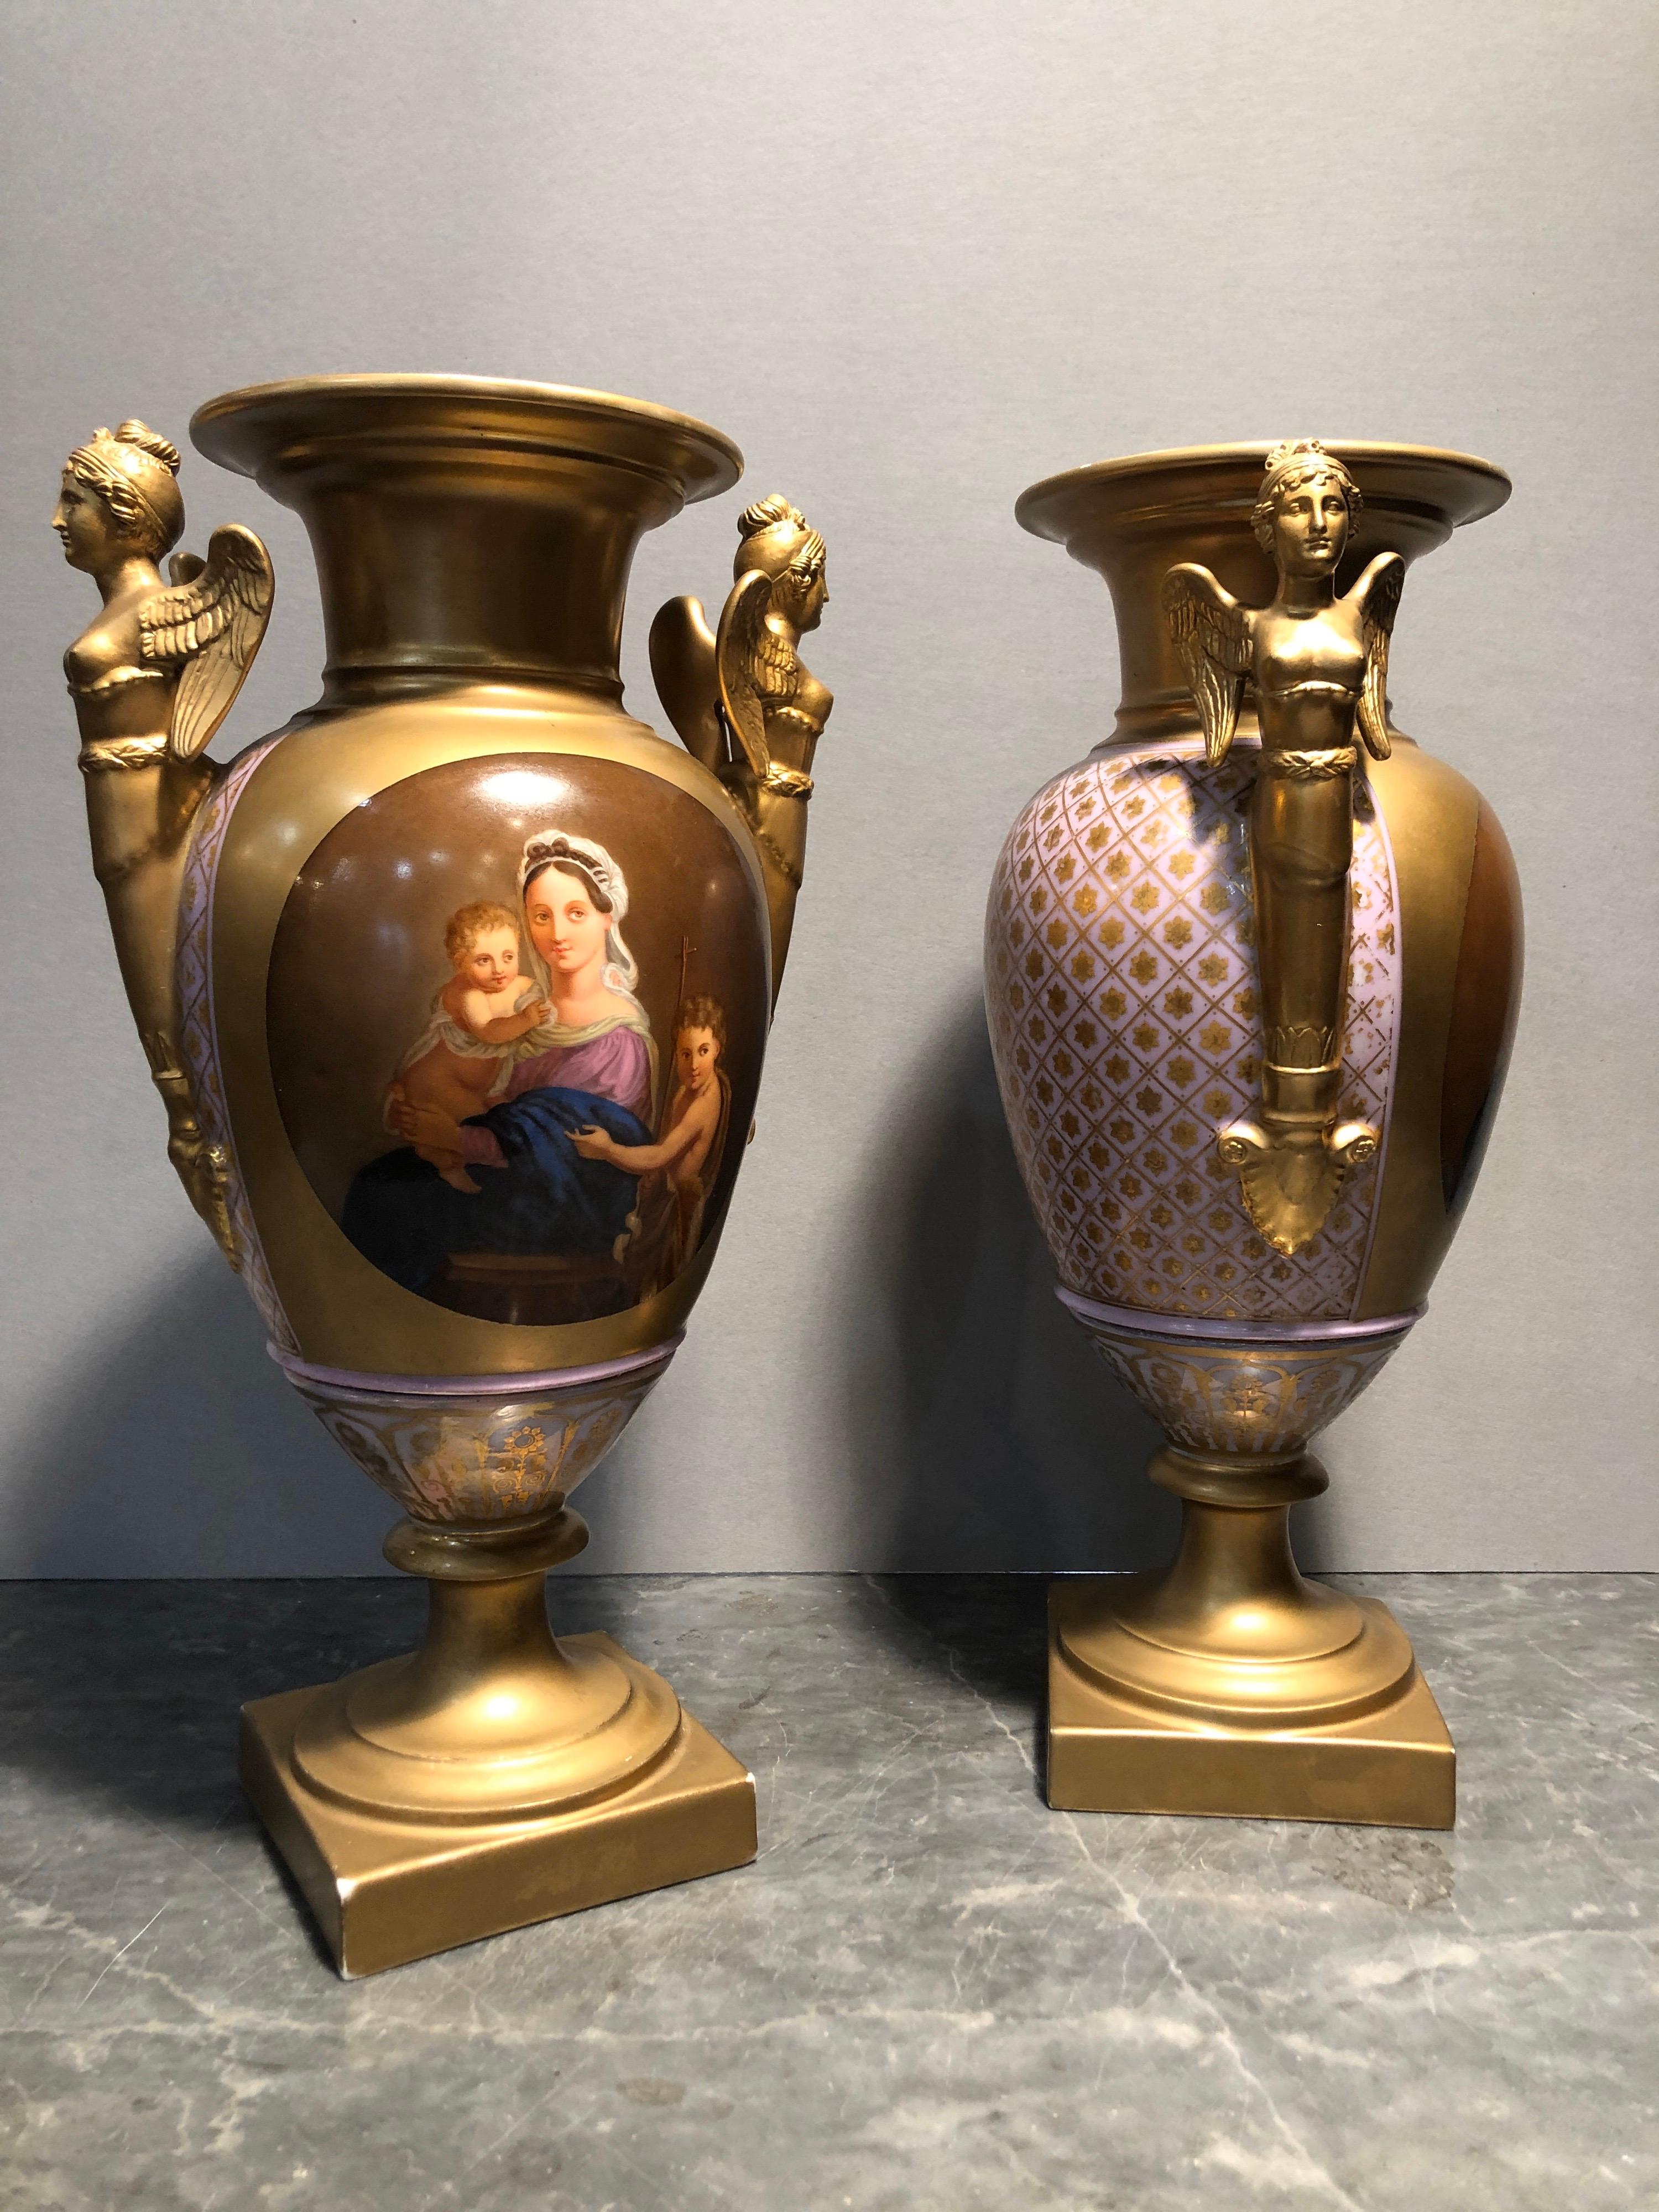 Pair of French vases, Old Paris, Louis Philippe, fantastic in form and painting, depicting sacred scenes. In excellent state of preservation.